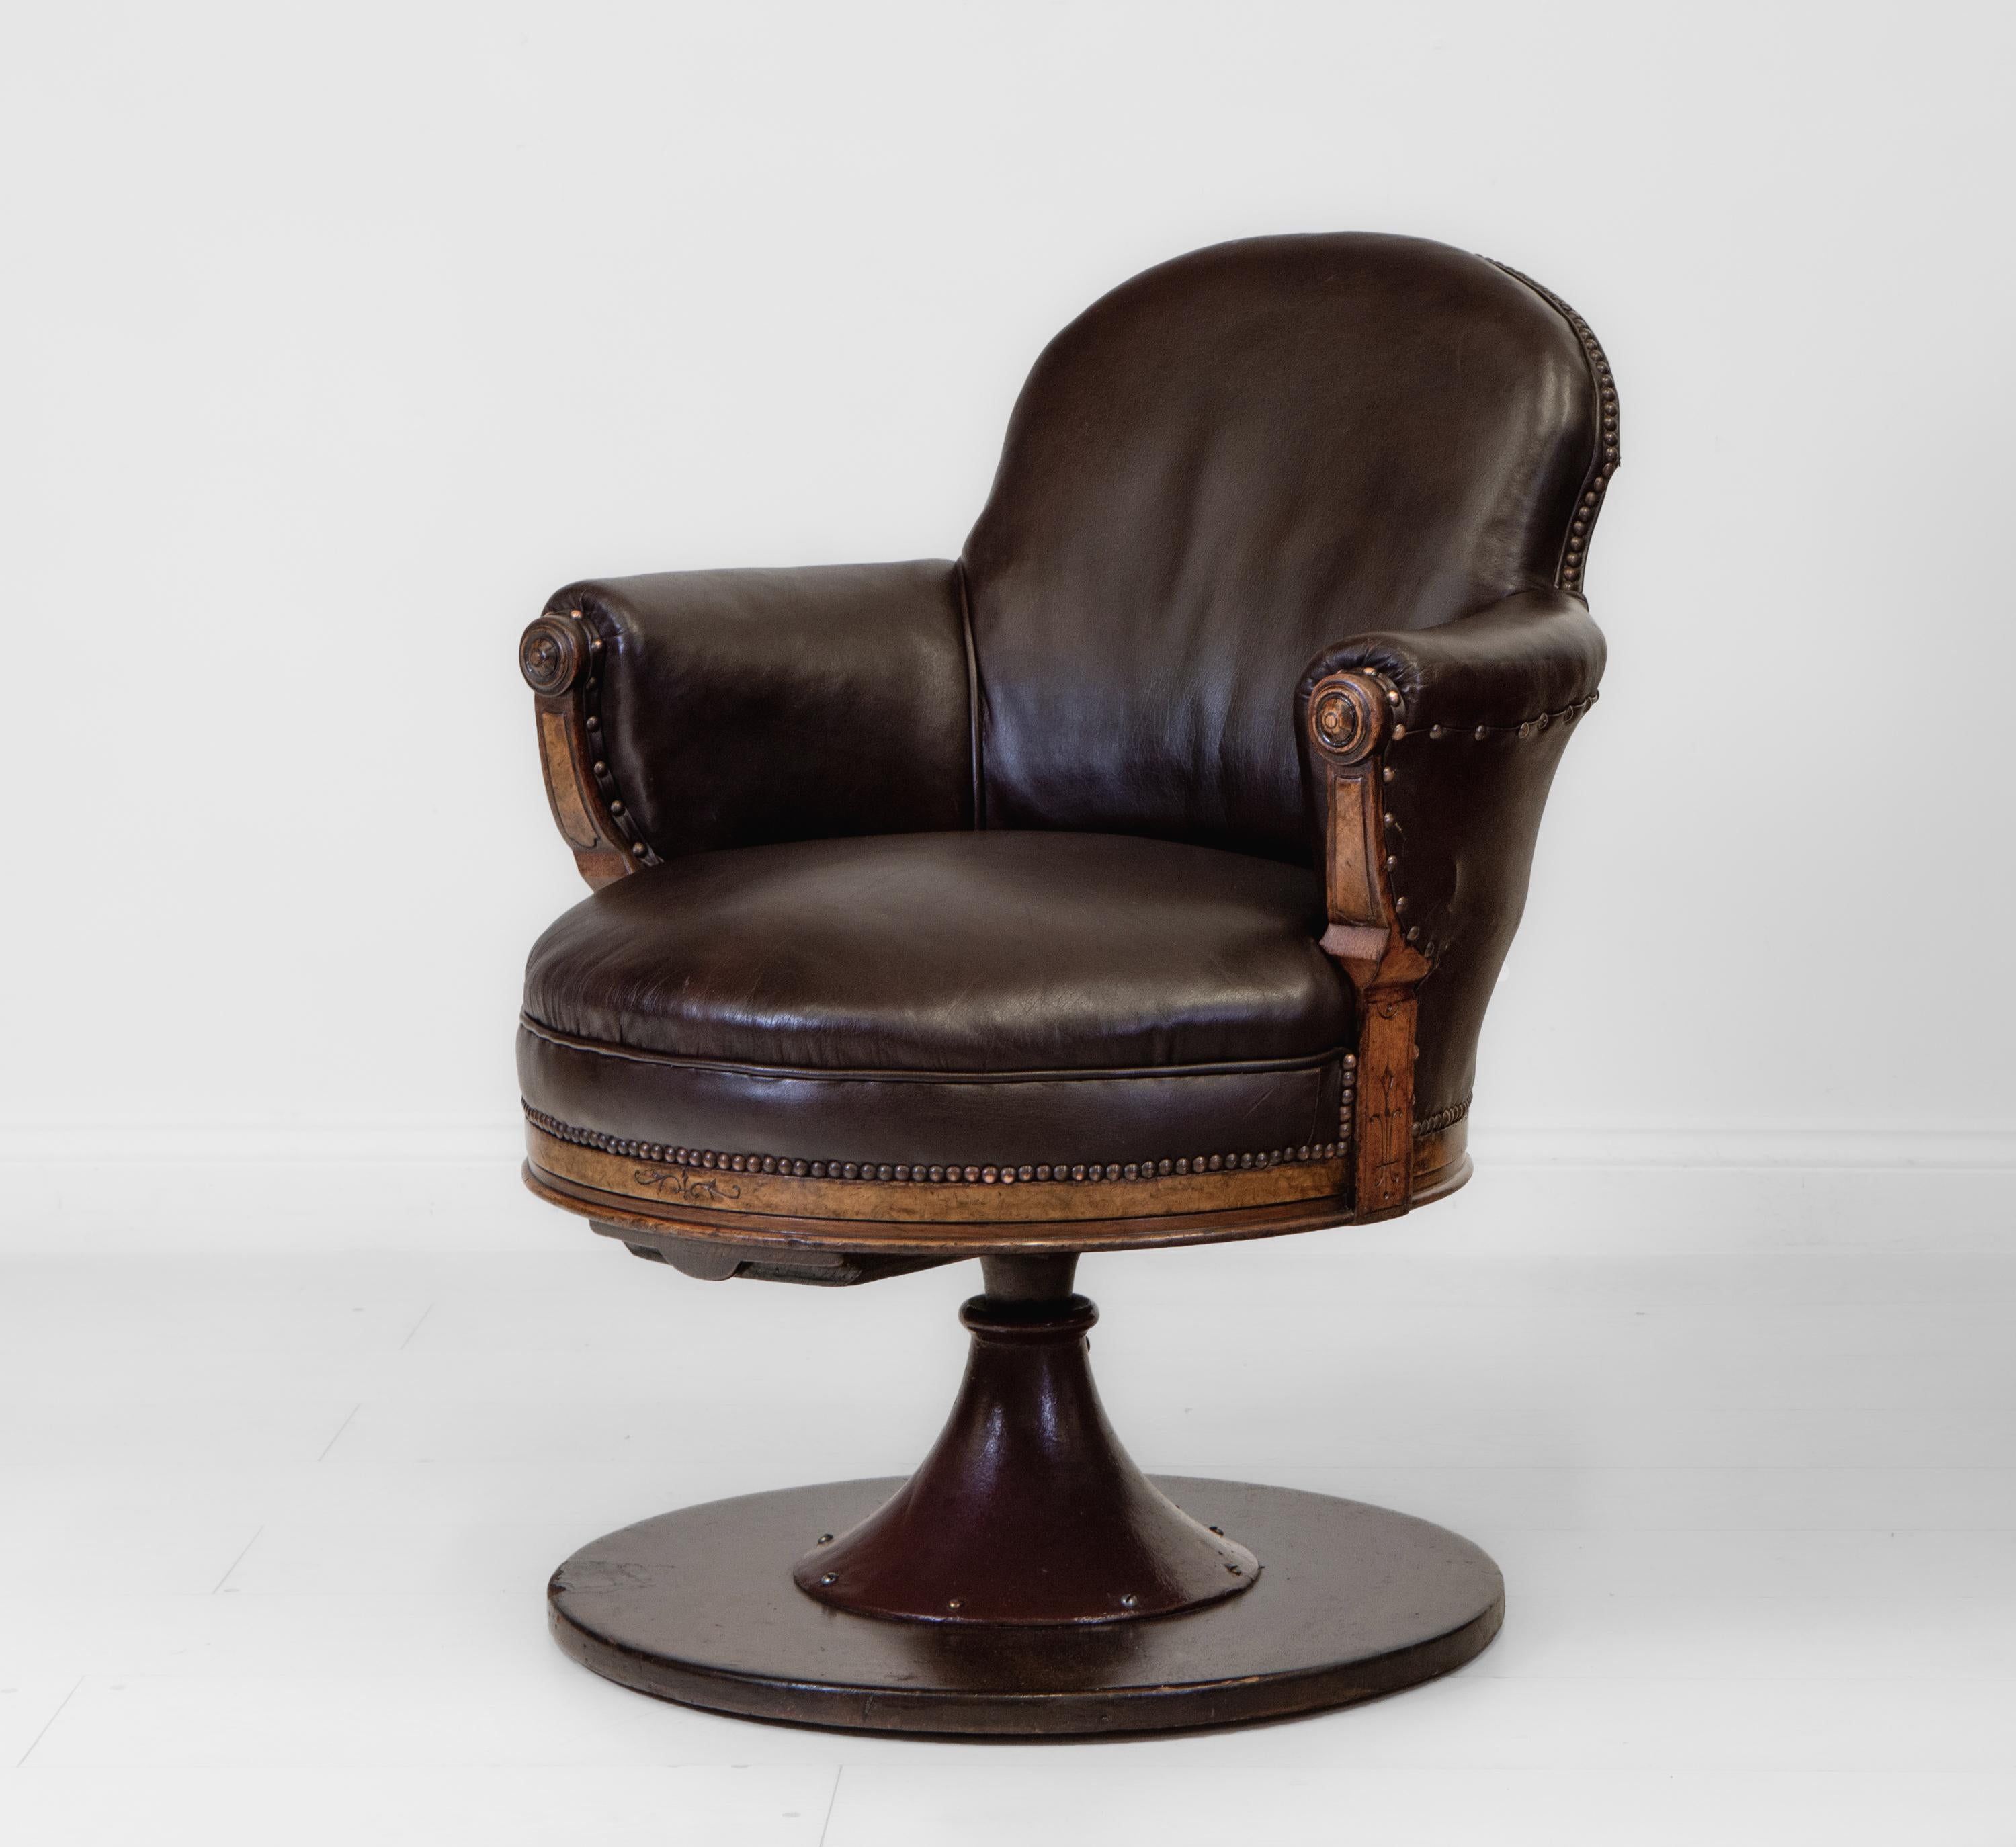 A rare 19th century leather and walnut swivel Pullman carriage railway club chair. Circa 1870.

With First Class resembling an elite private clubhouse, the Pullman carriages were sumptuous and decadent, as shown in the sketch of an early First Class